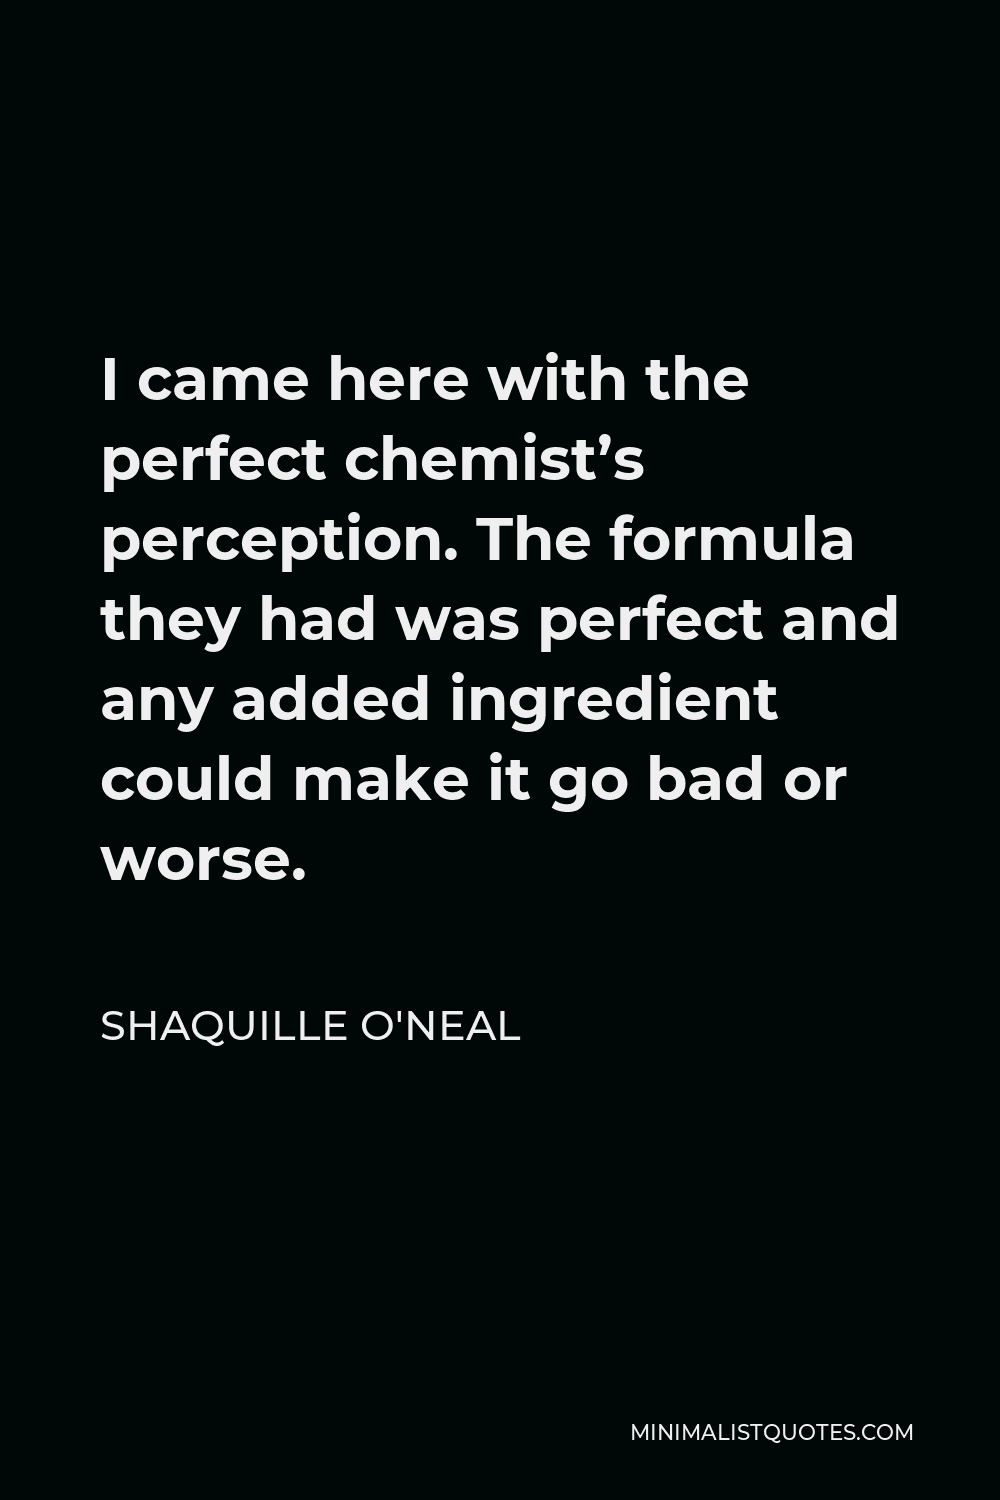 Shaquille O'Neal Quote - I came here with the perfect chemist’s perception. The formula they had was perfect and any added ingredient could make it go bad or worse.